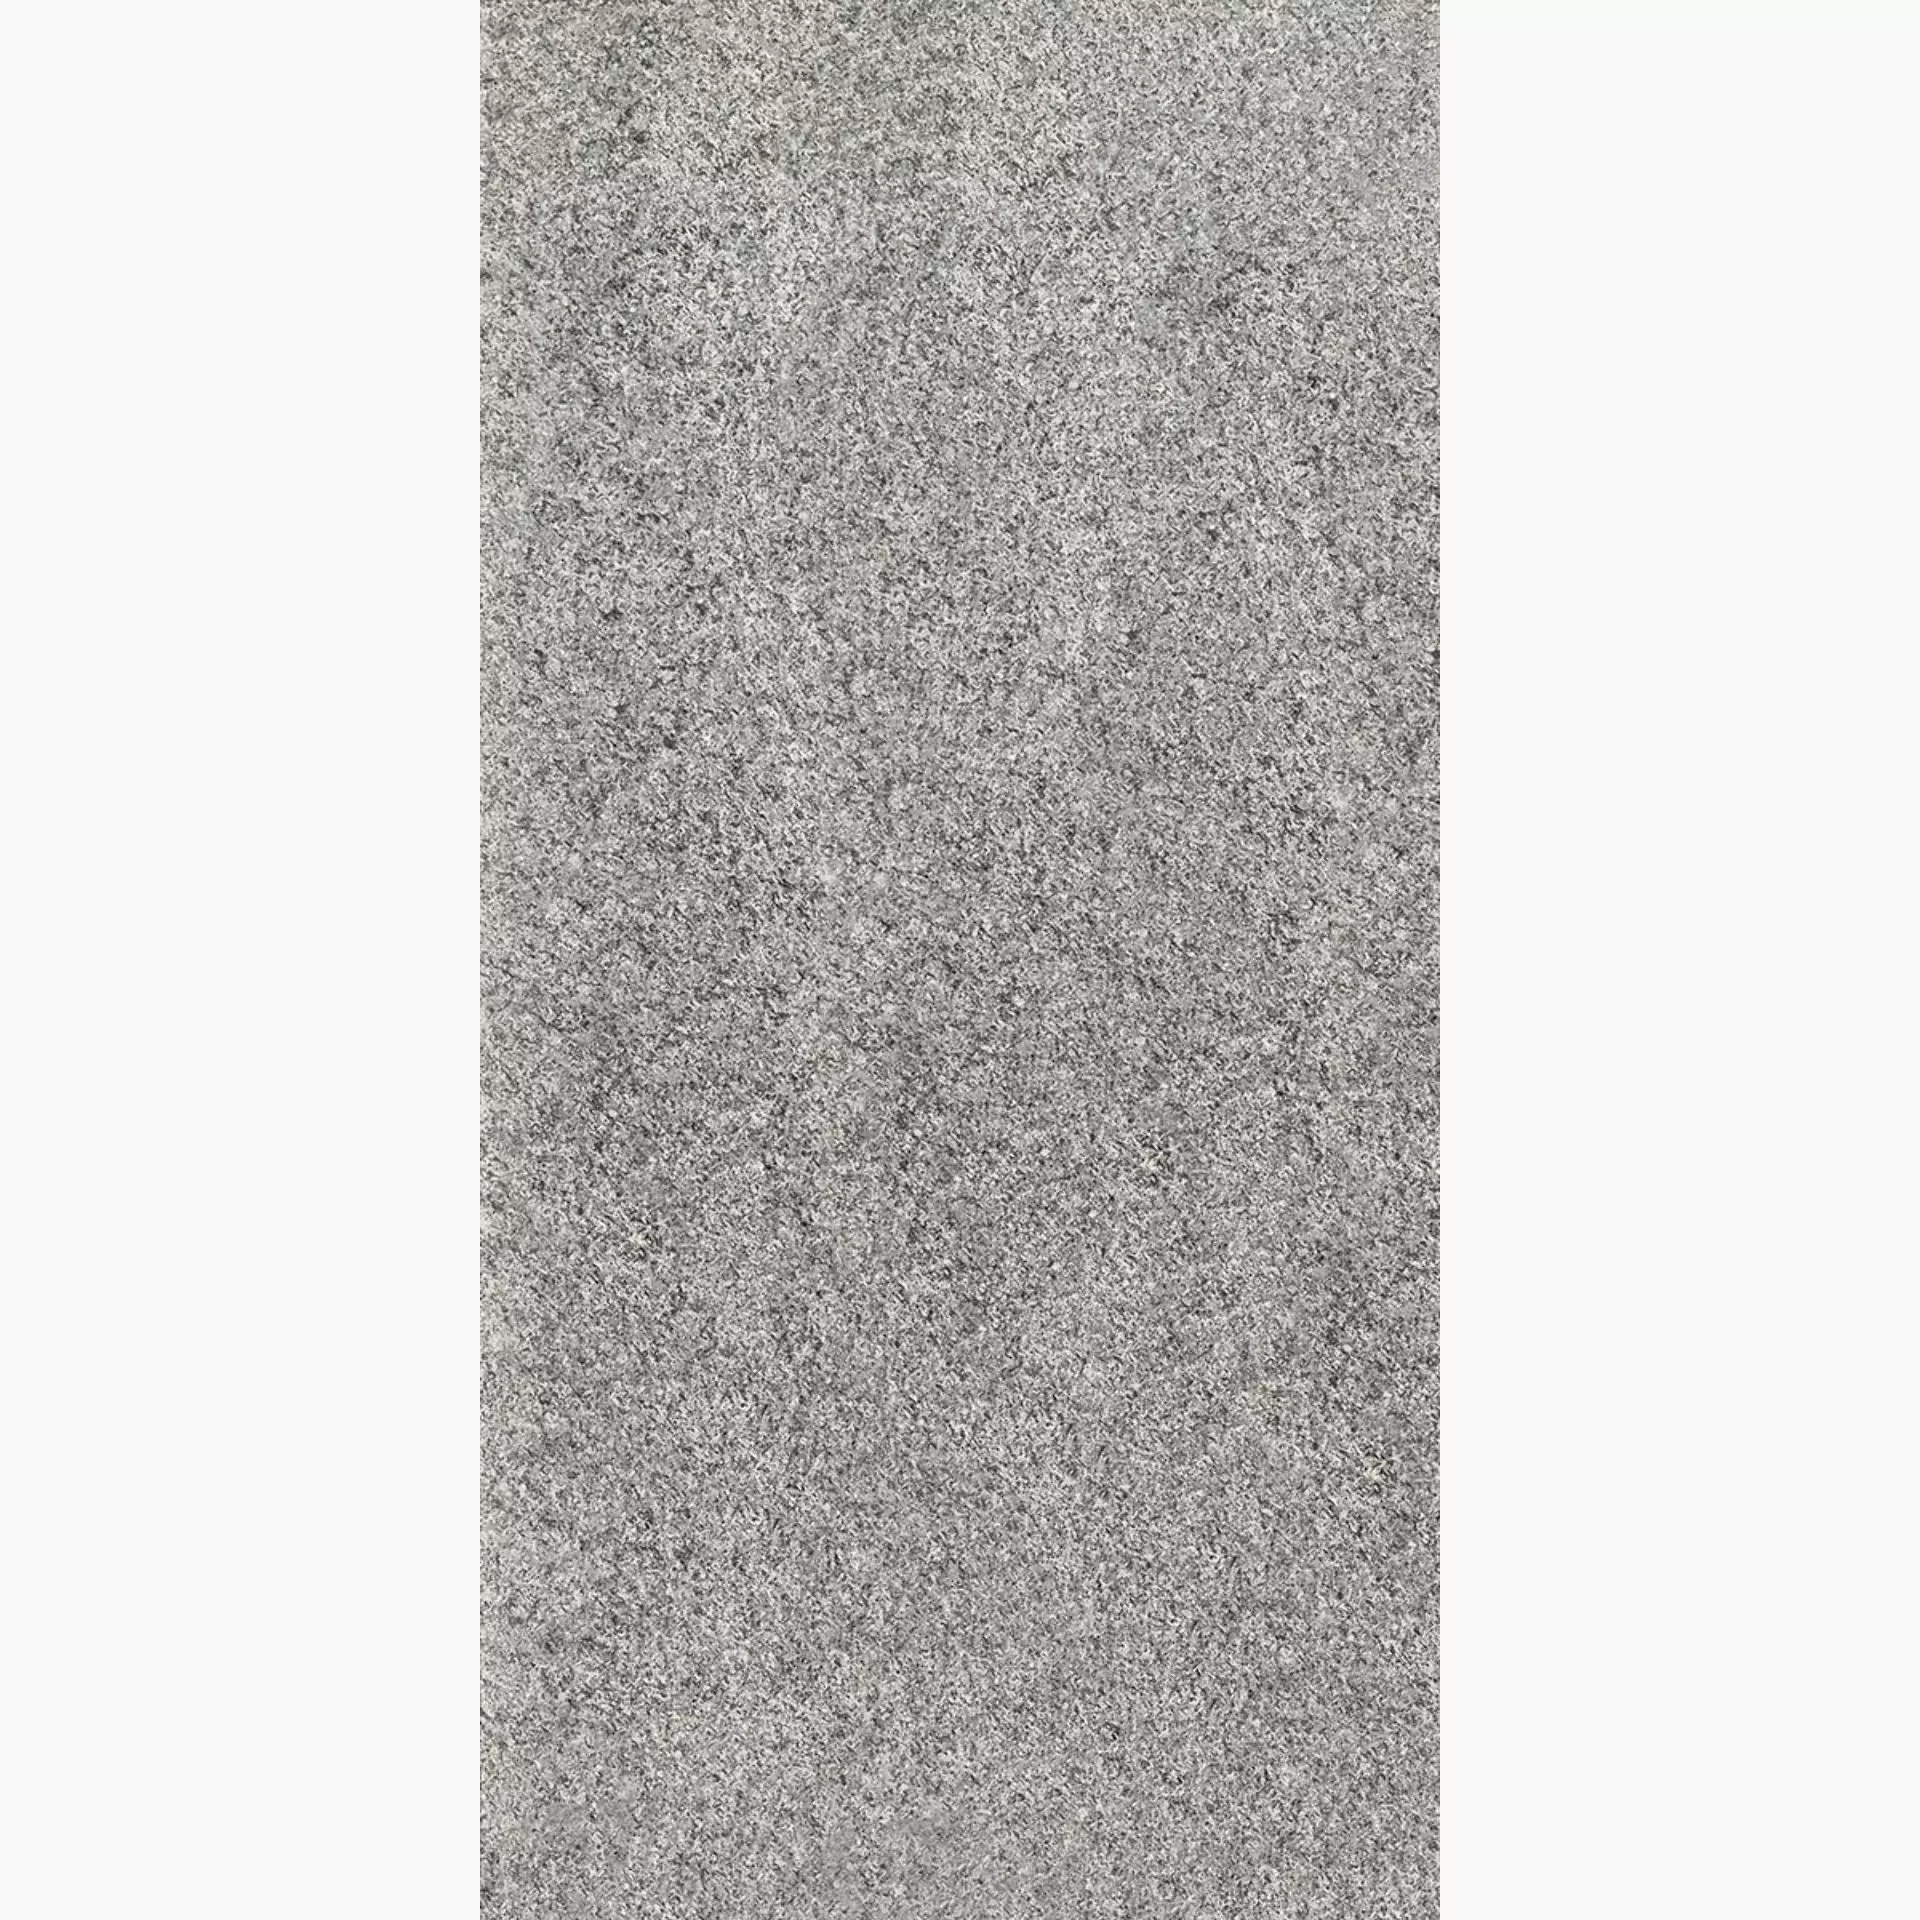 Keope Percorsi Frame Gneiss Grey Strutturato 4932474A 30x60cm rectified 9mm